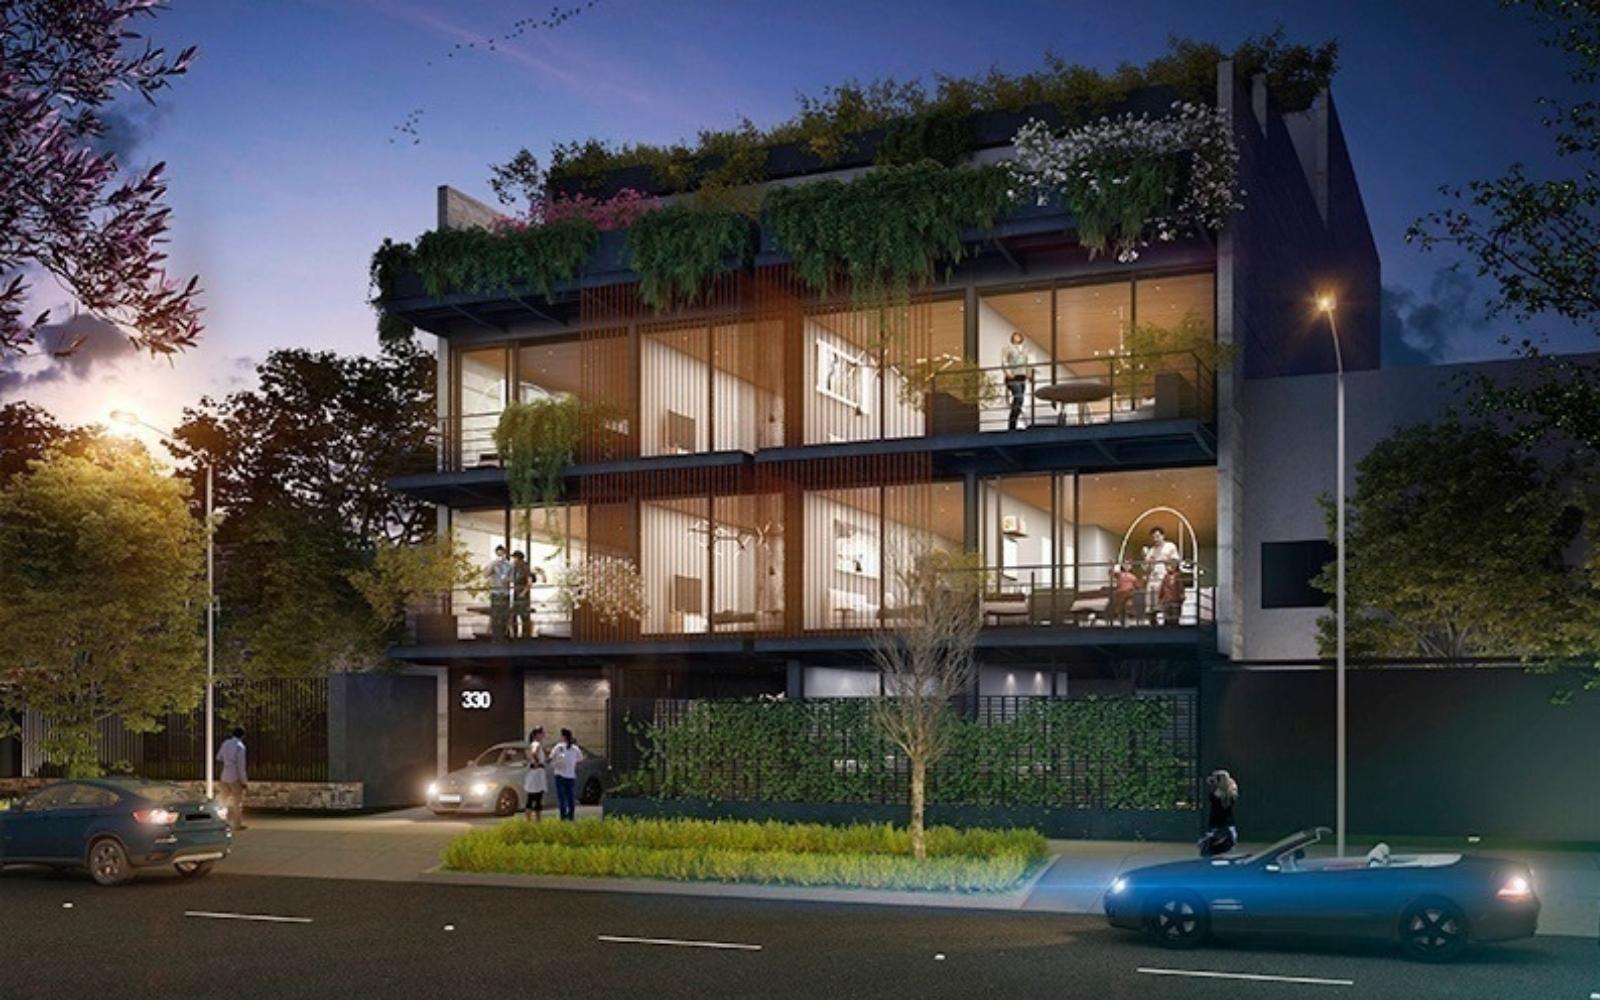 Apartment with more than 40 amenities for sale, Interlomas, CDMX